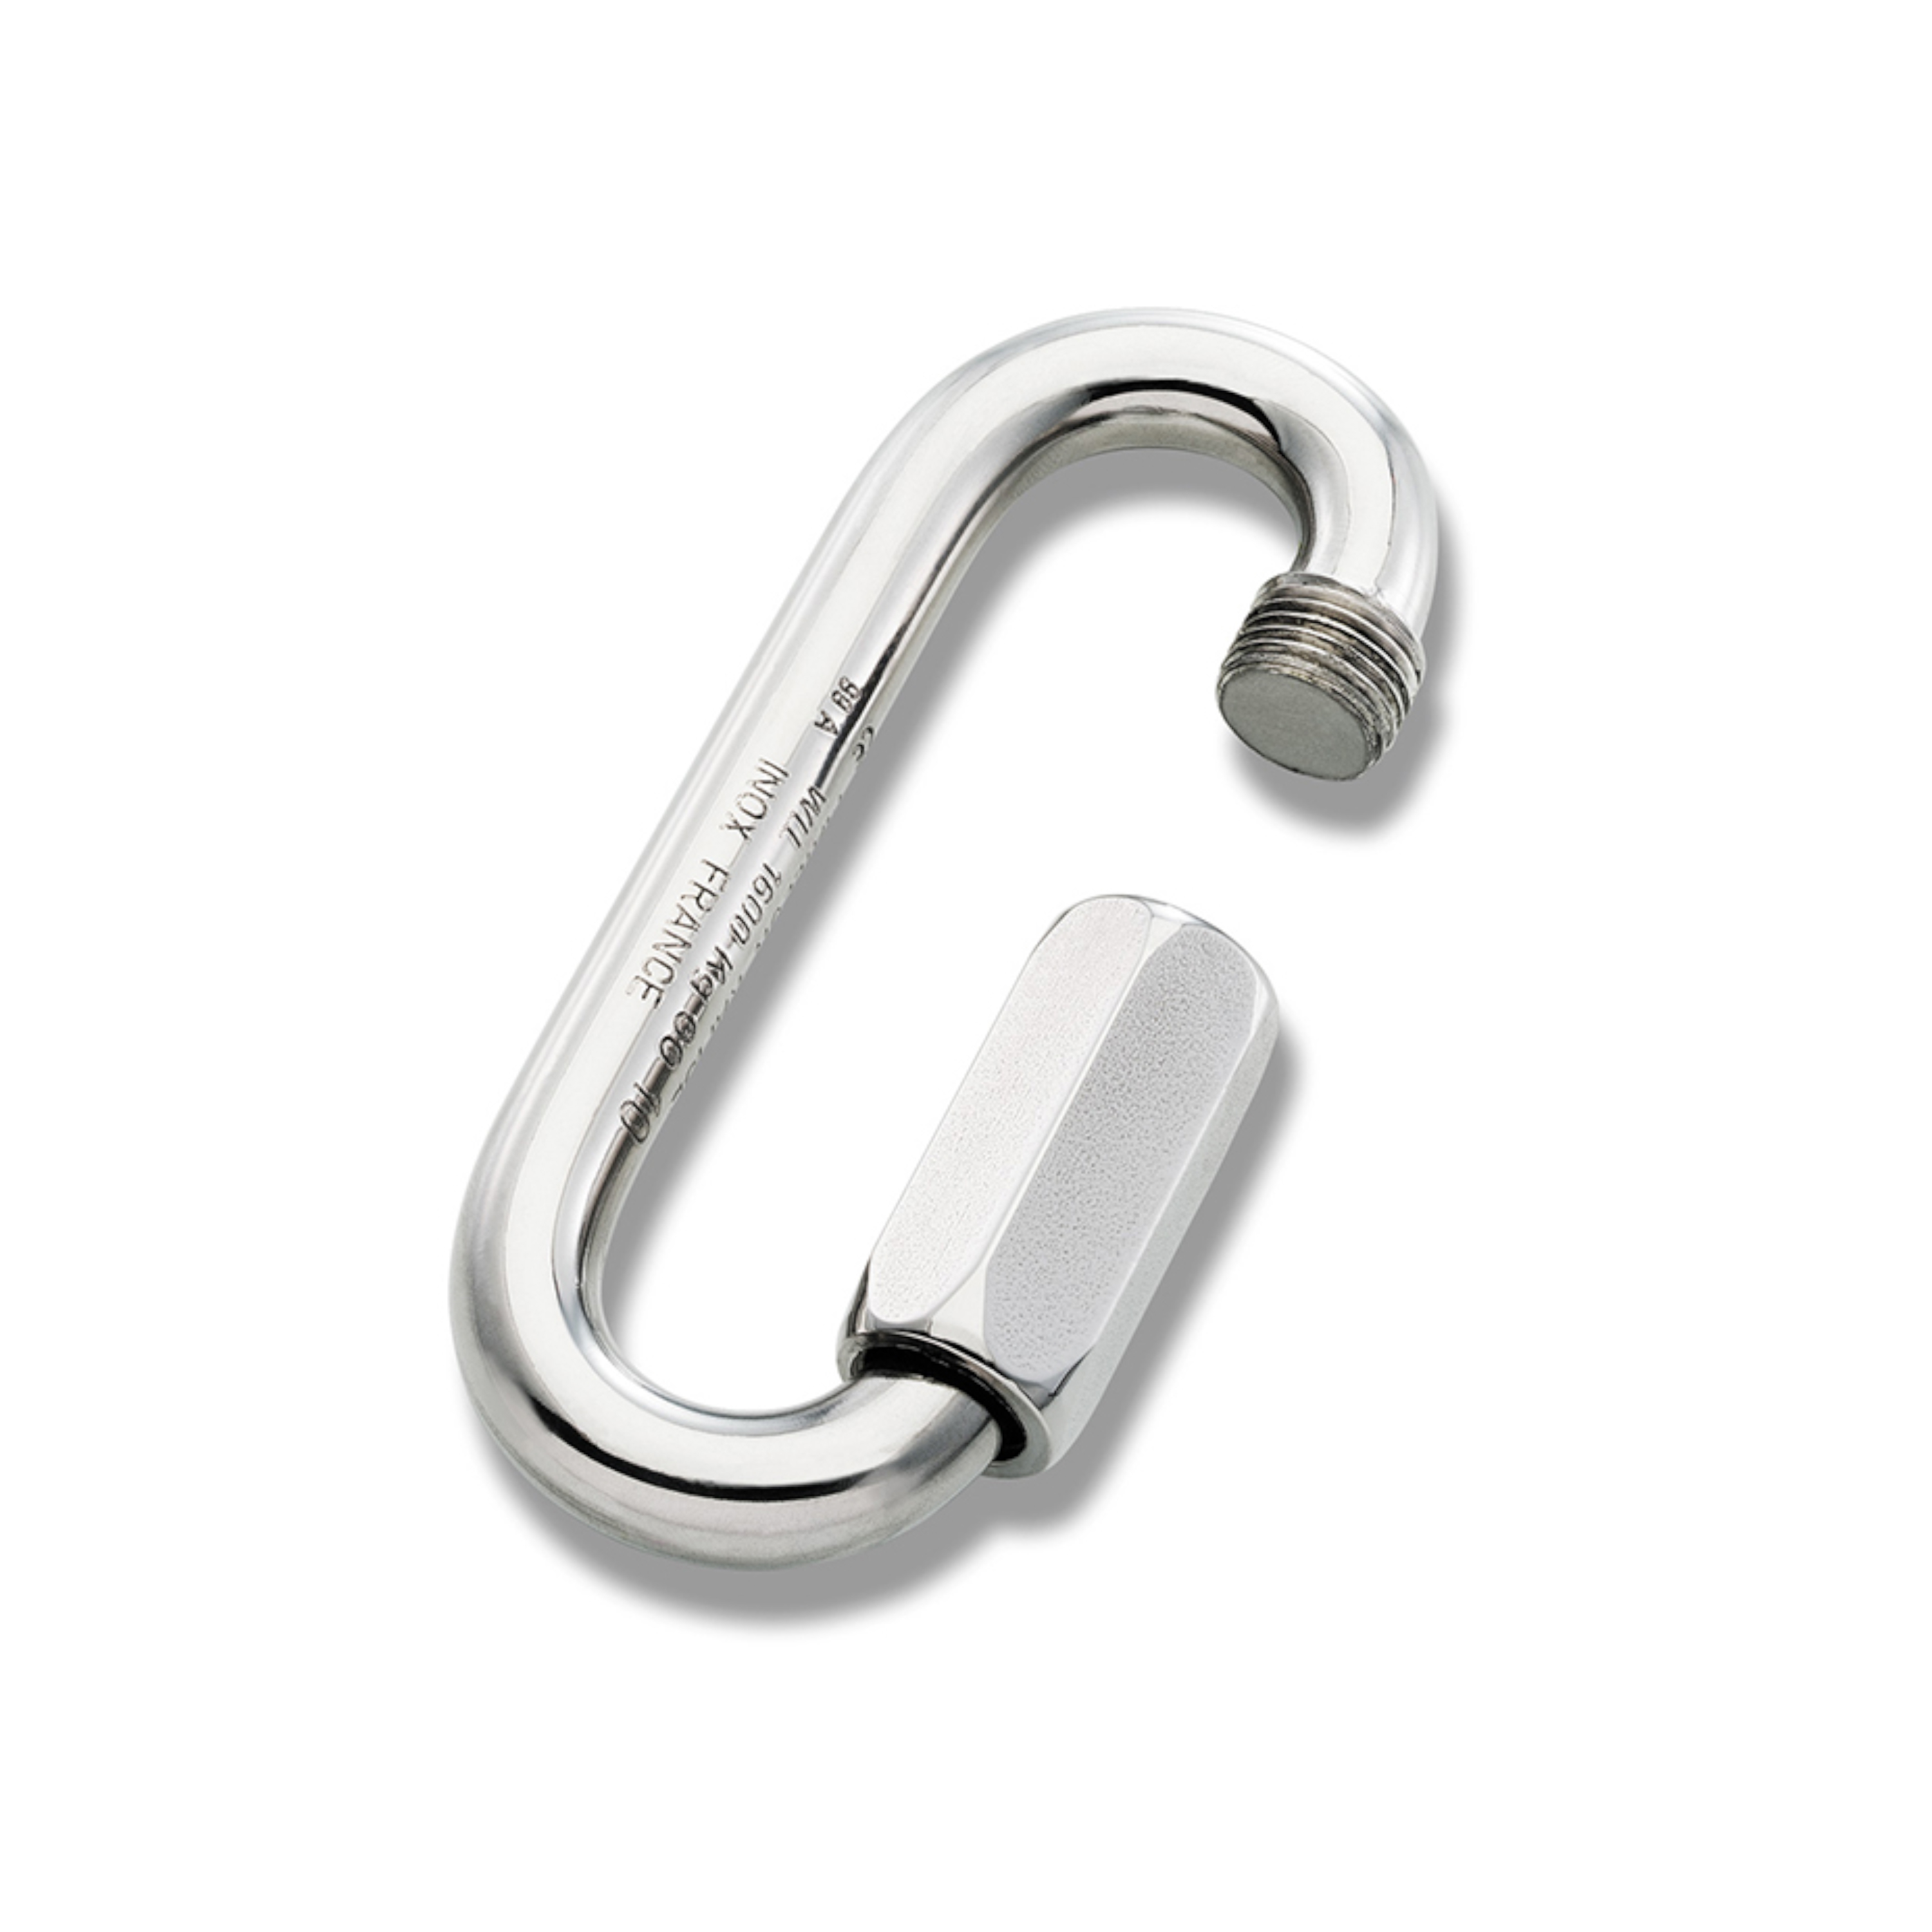 8mm Quick Link - Maillon Rapide - INOX